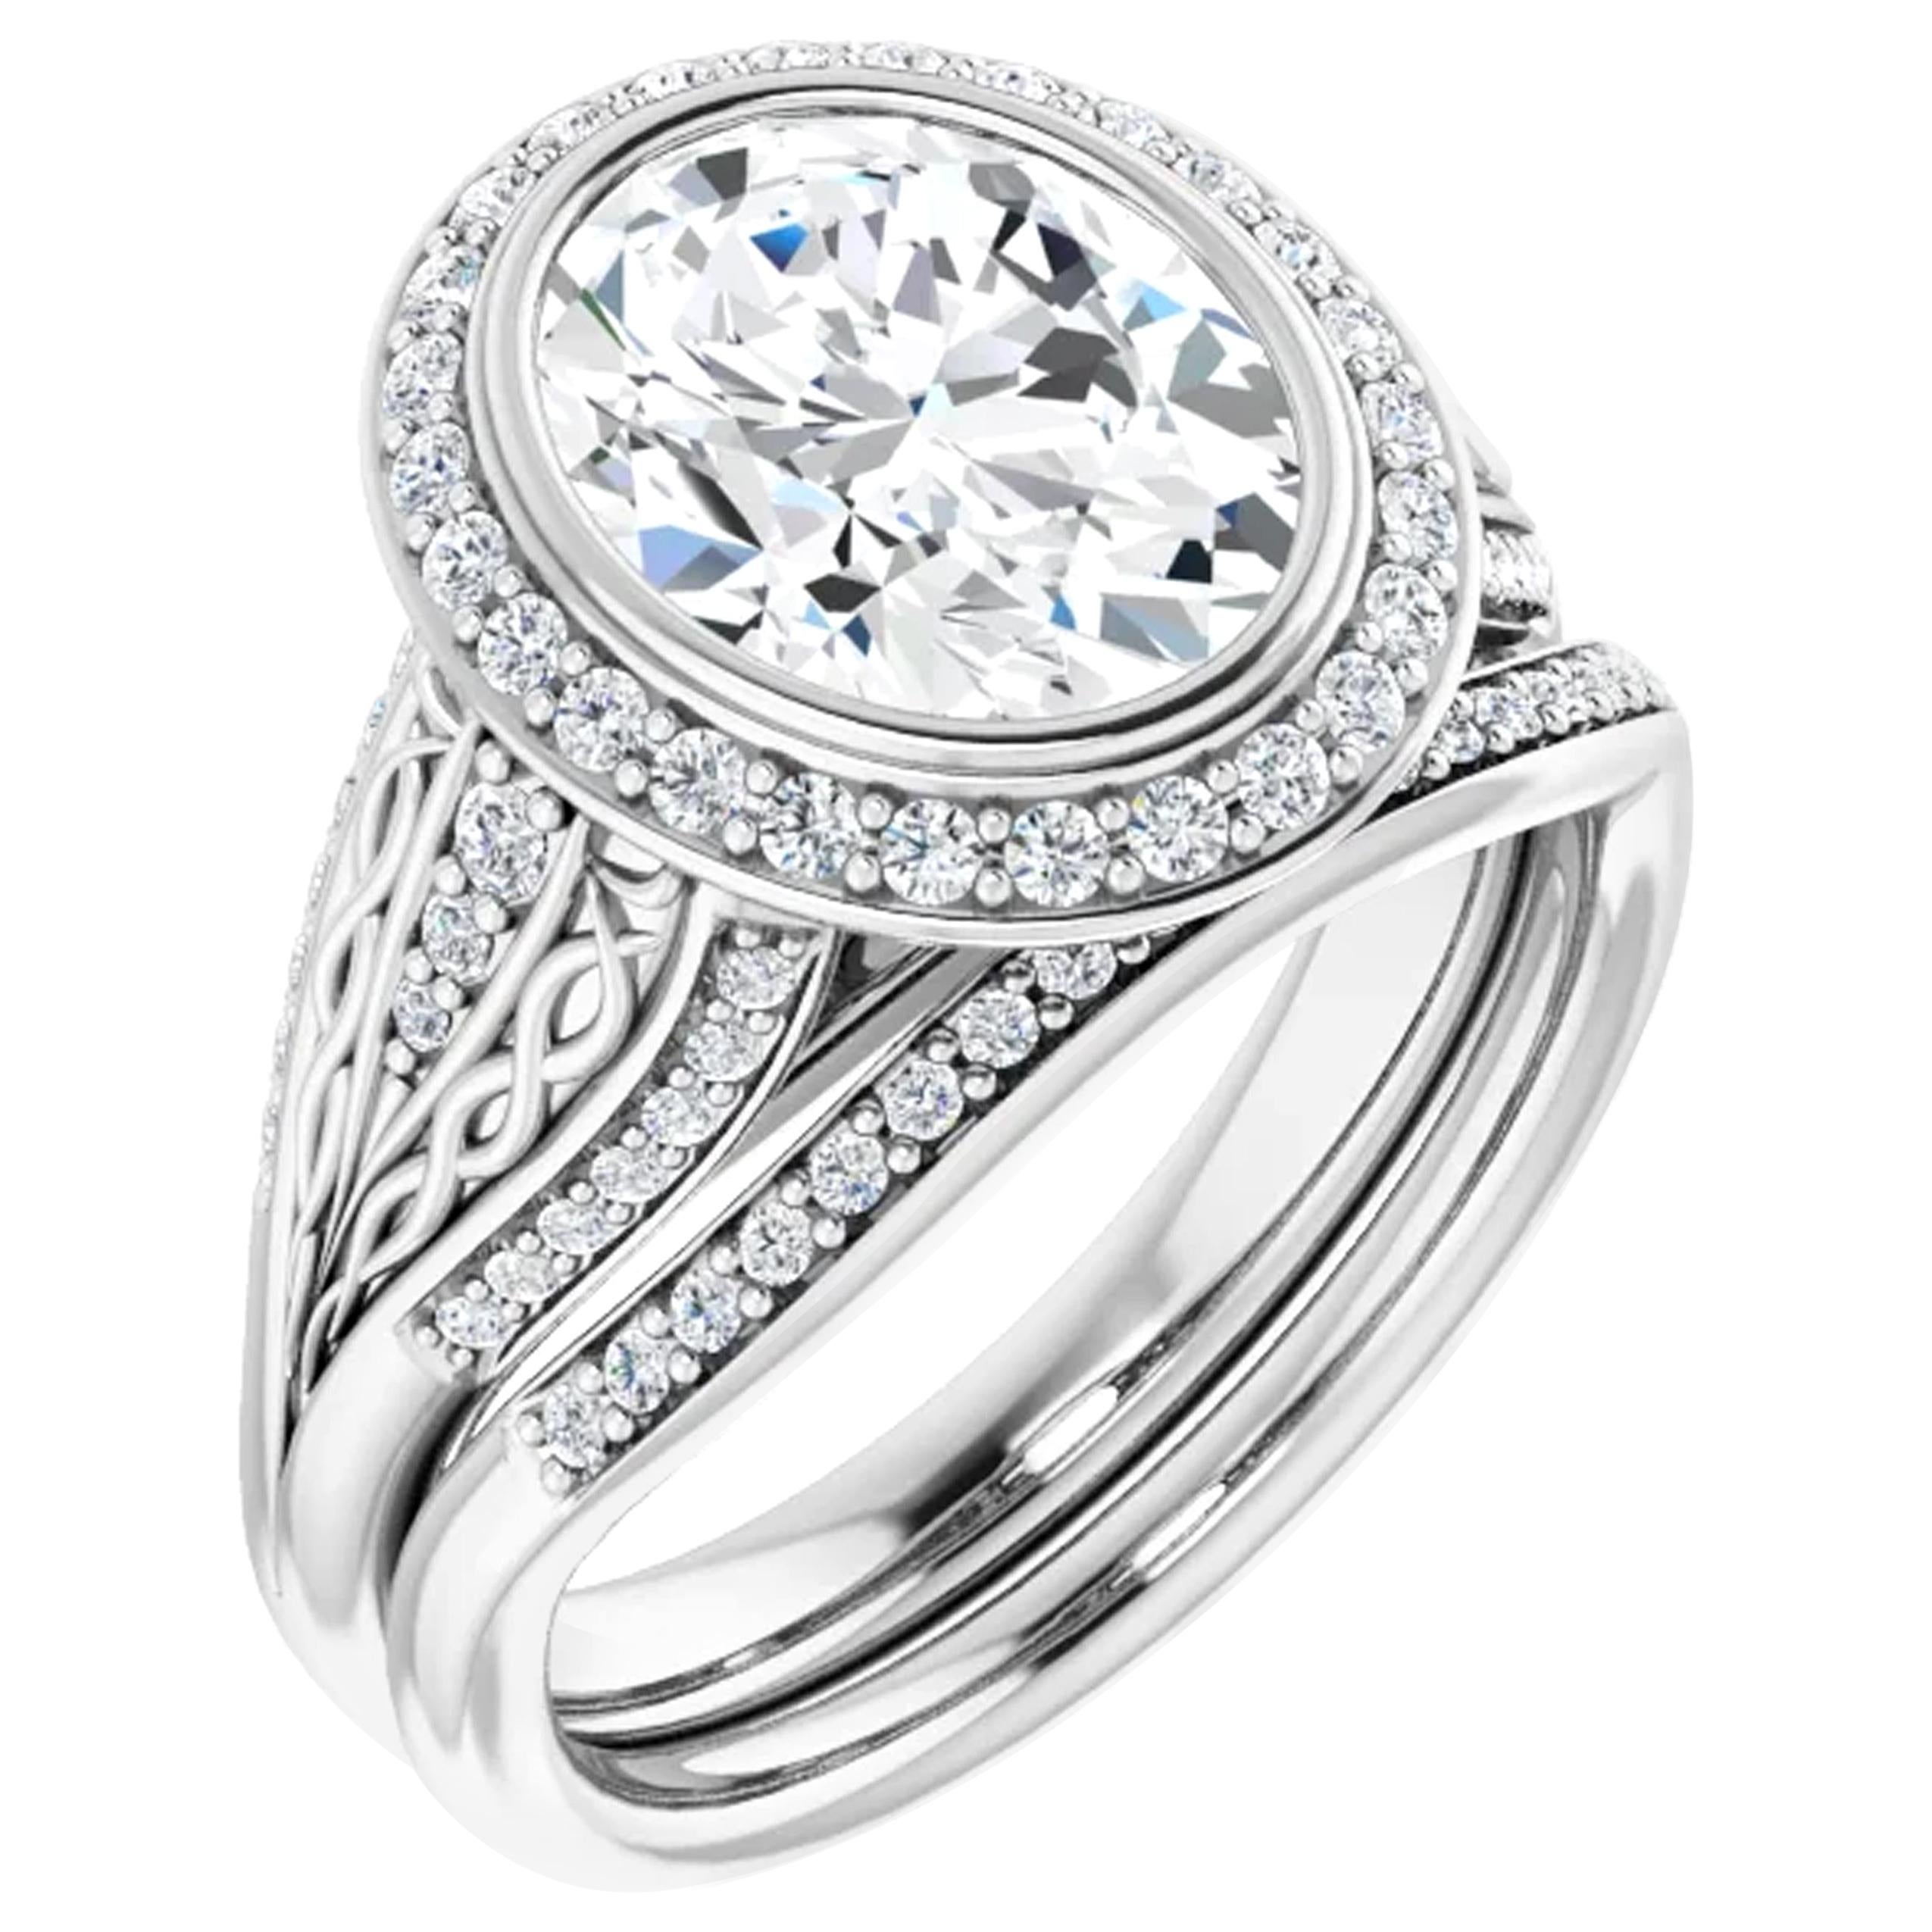 Halo GIA Oval Interwoven Diamond Engagement Ring 18k White Gold 1.52 Carats For Sale